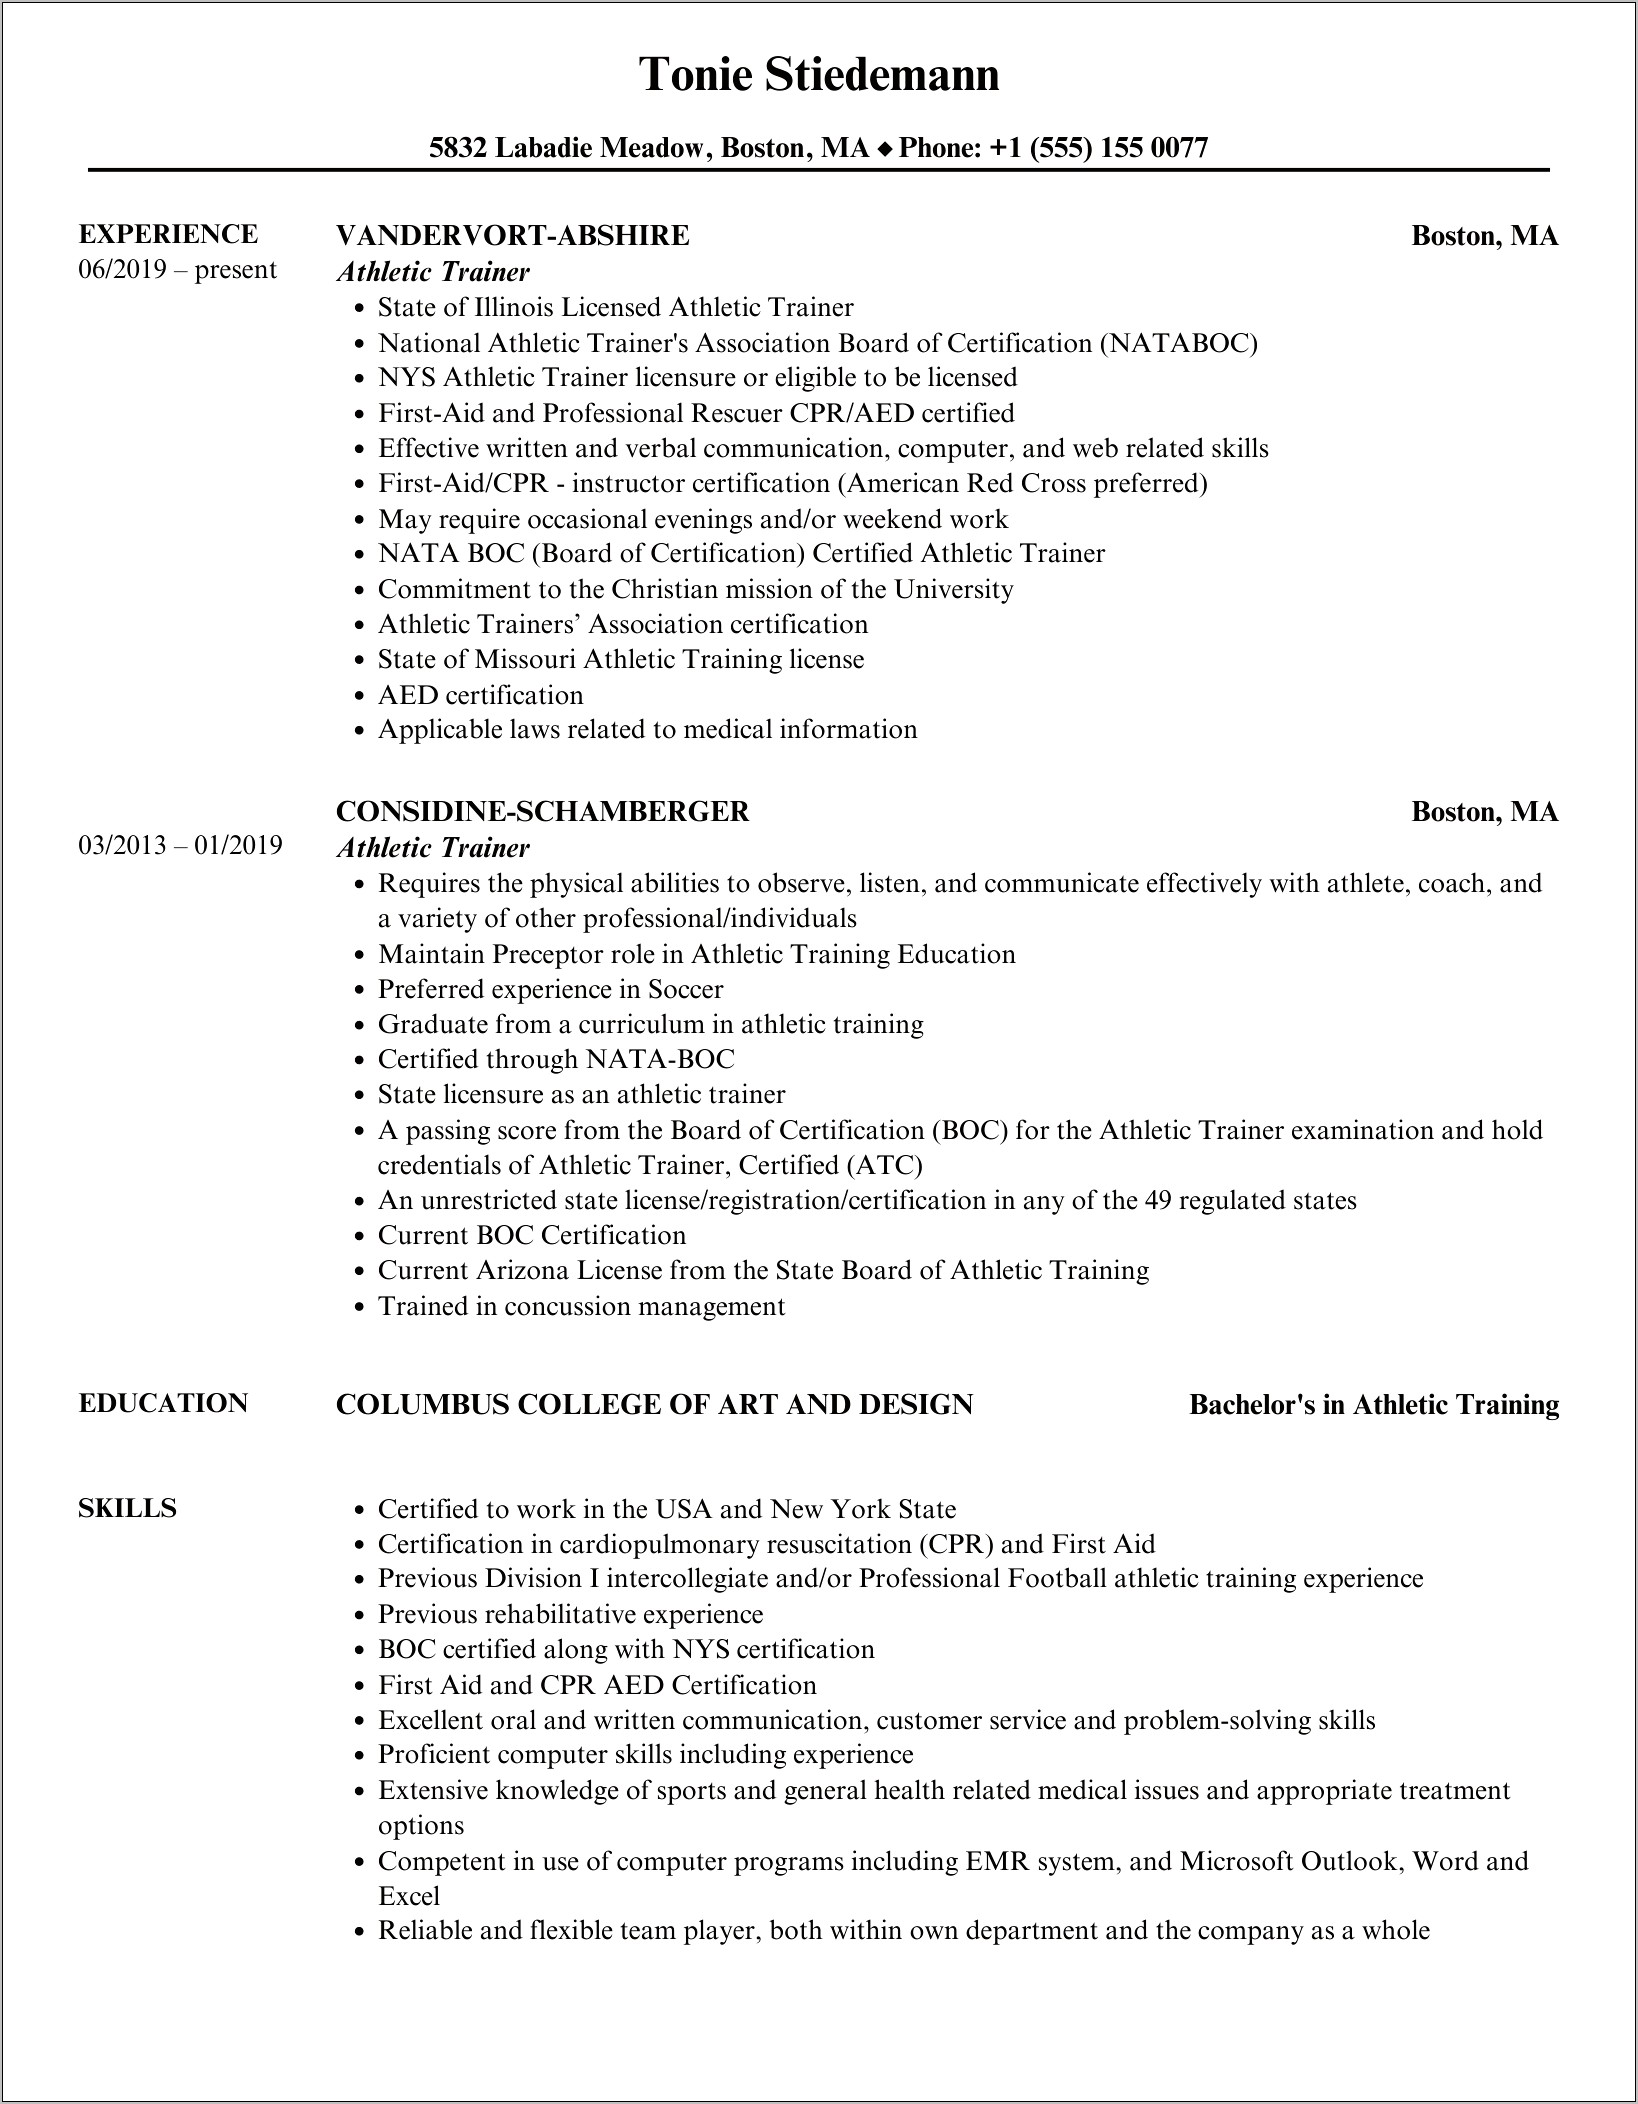 Resume Examples For Athletic Trainers